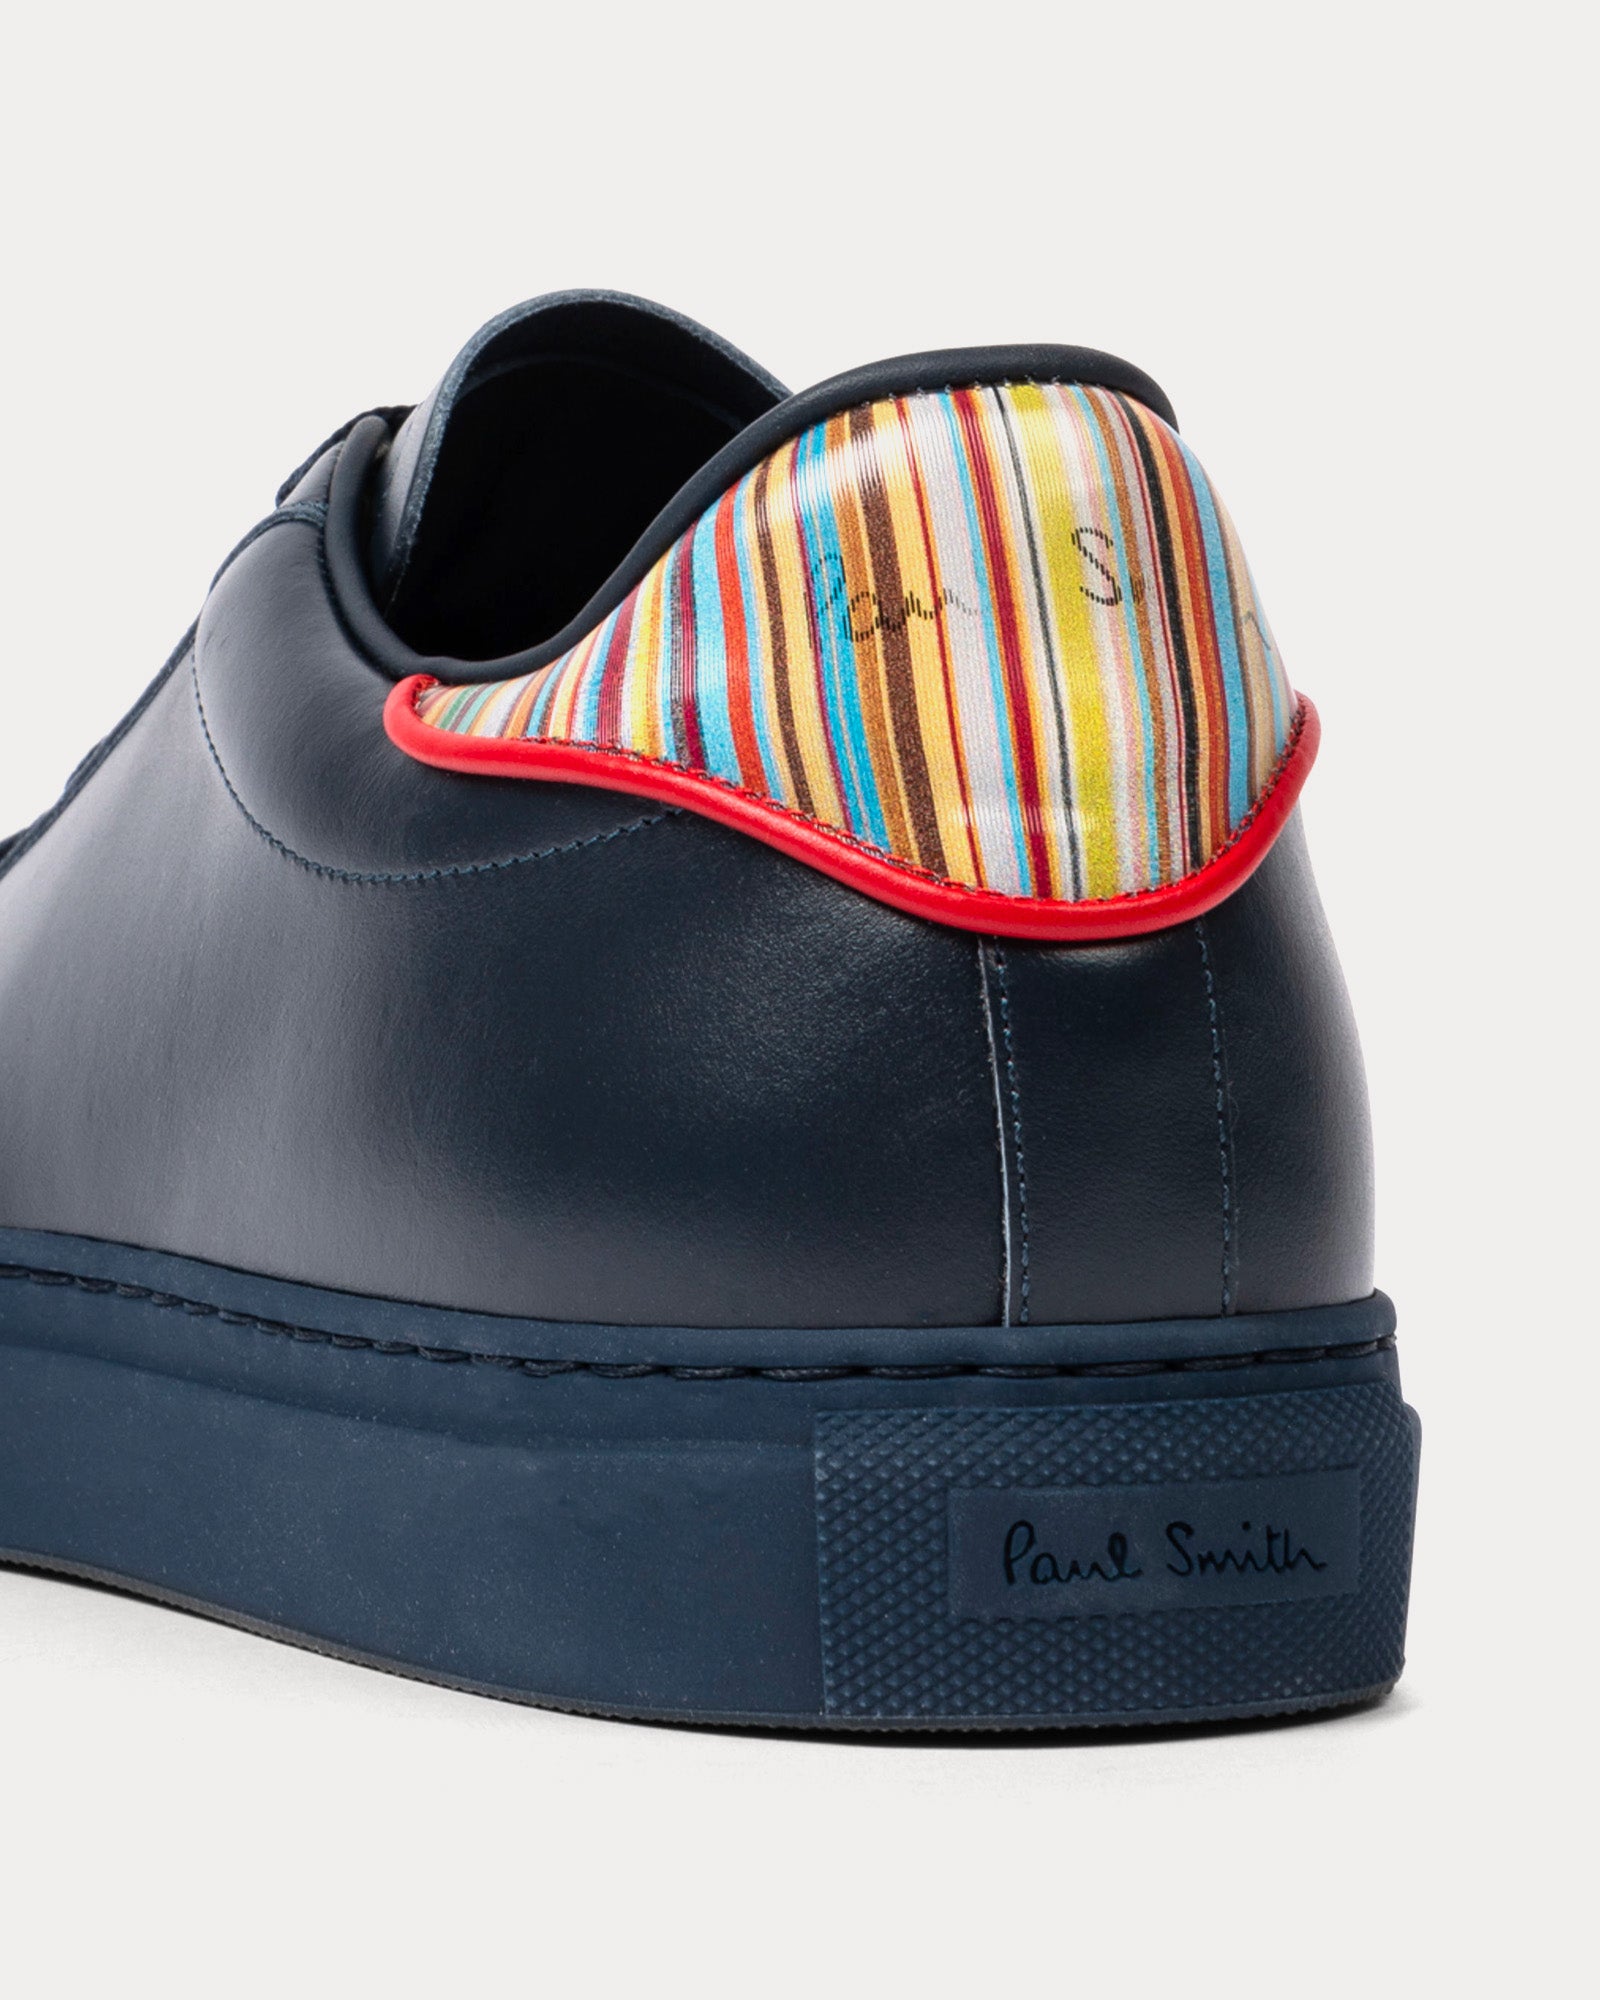 Paul Smith - Beck with Signature Stripe Leather Navy Low Top Sneakers